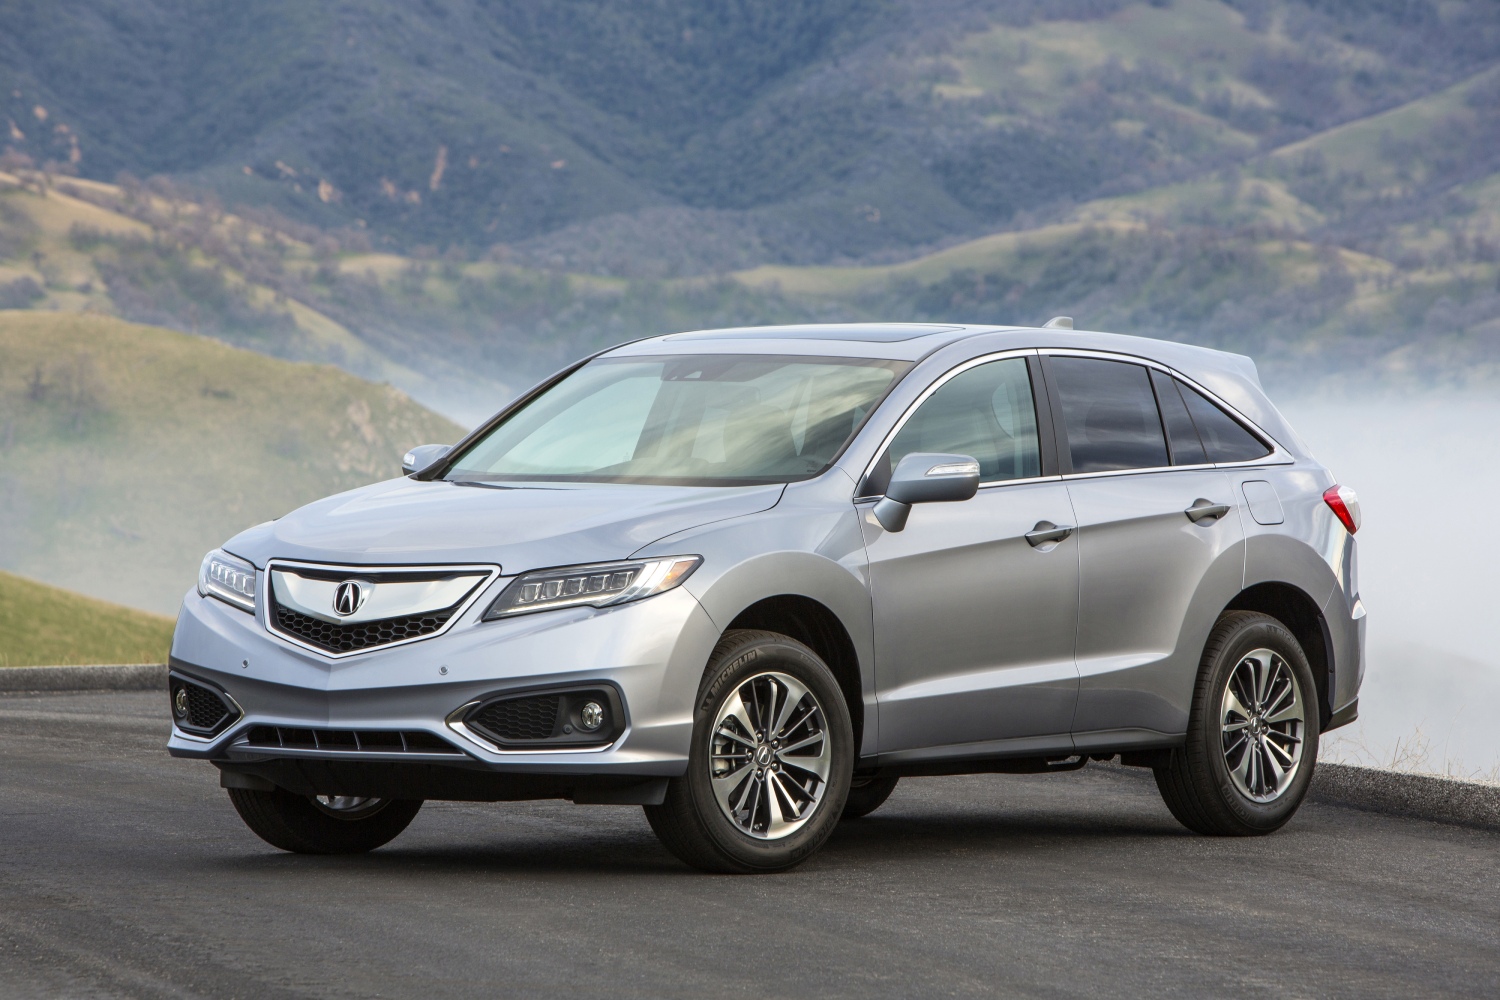 These small used luxury SUVs include this 2017 Acura RDX